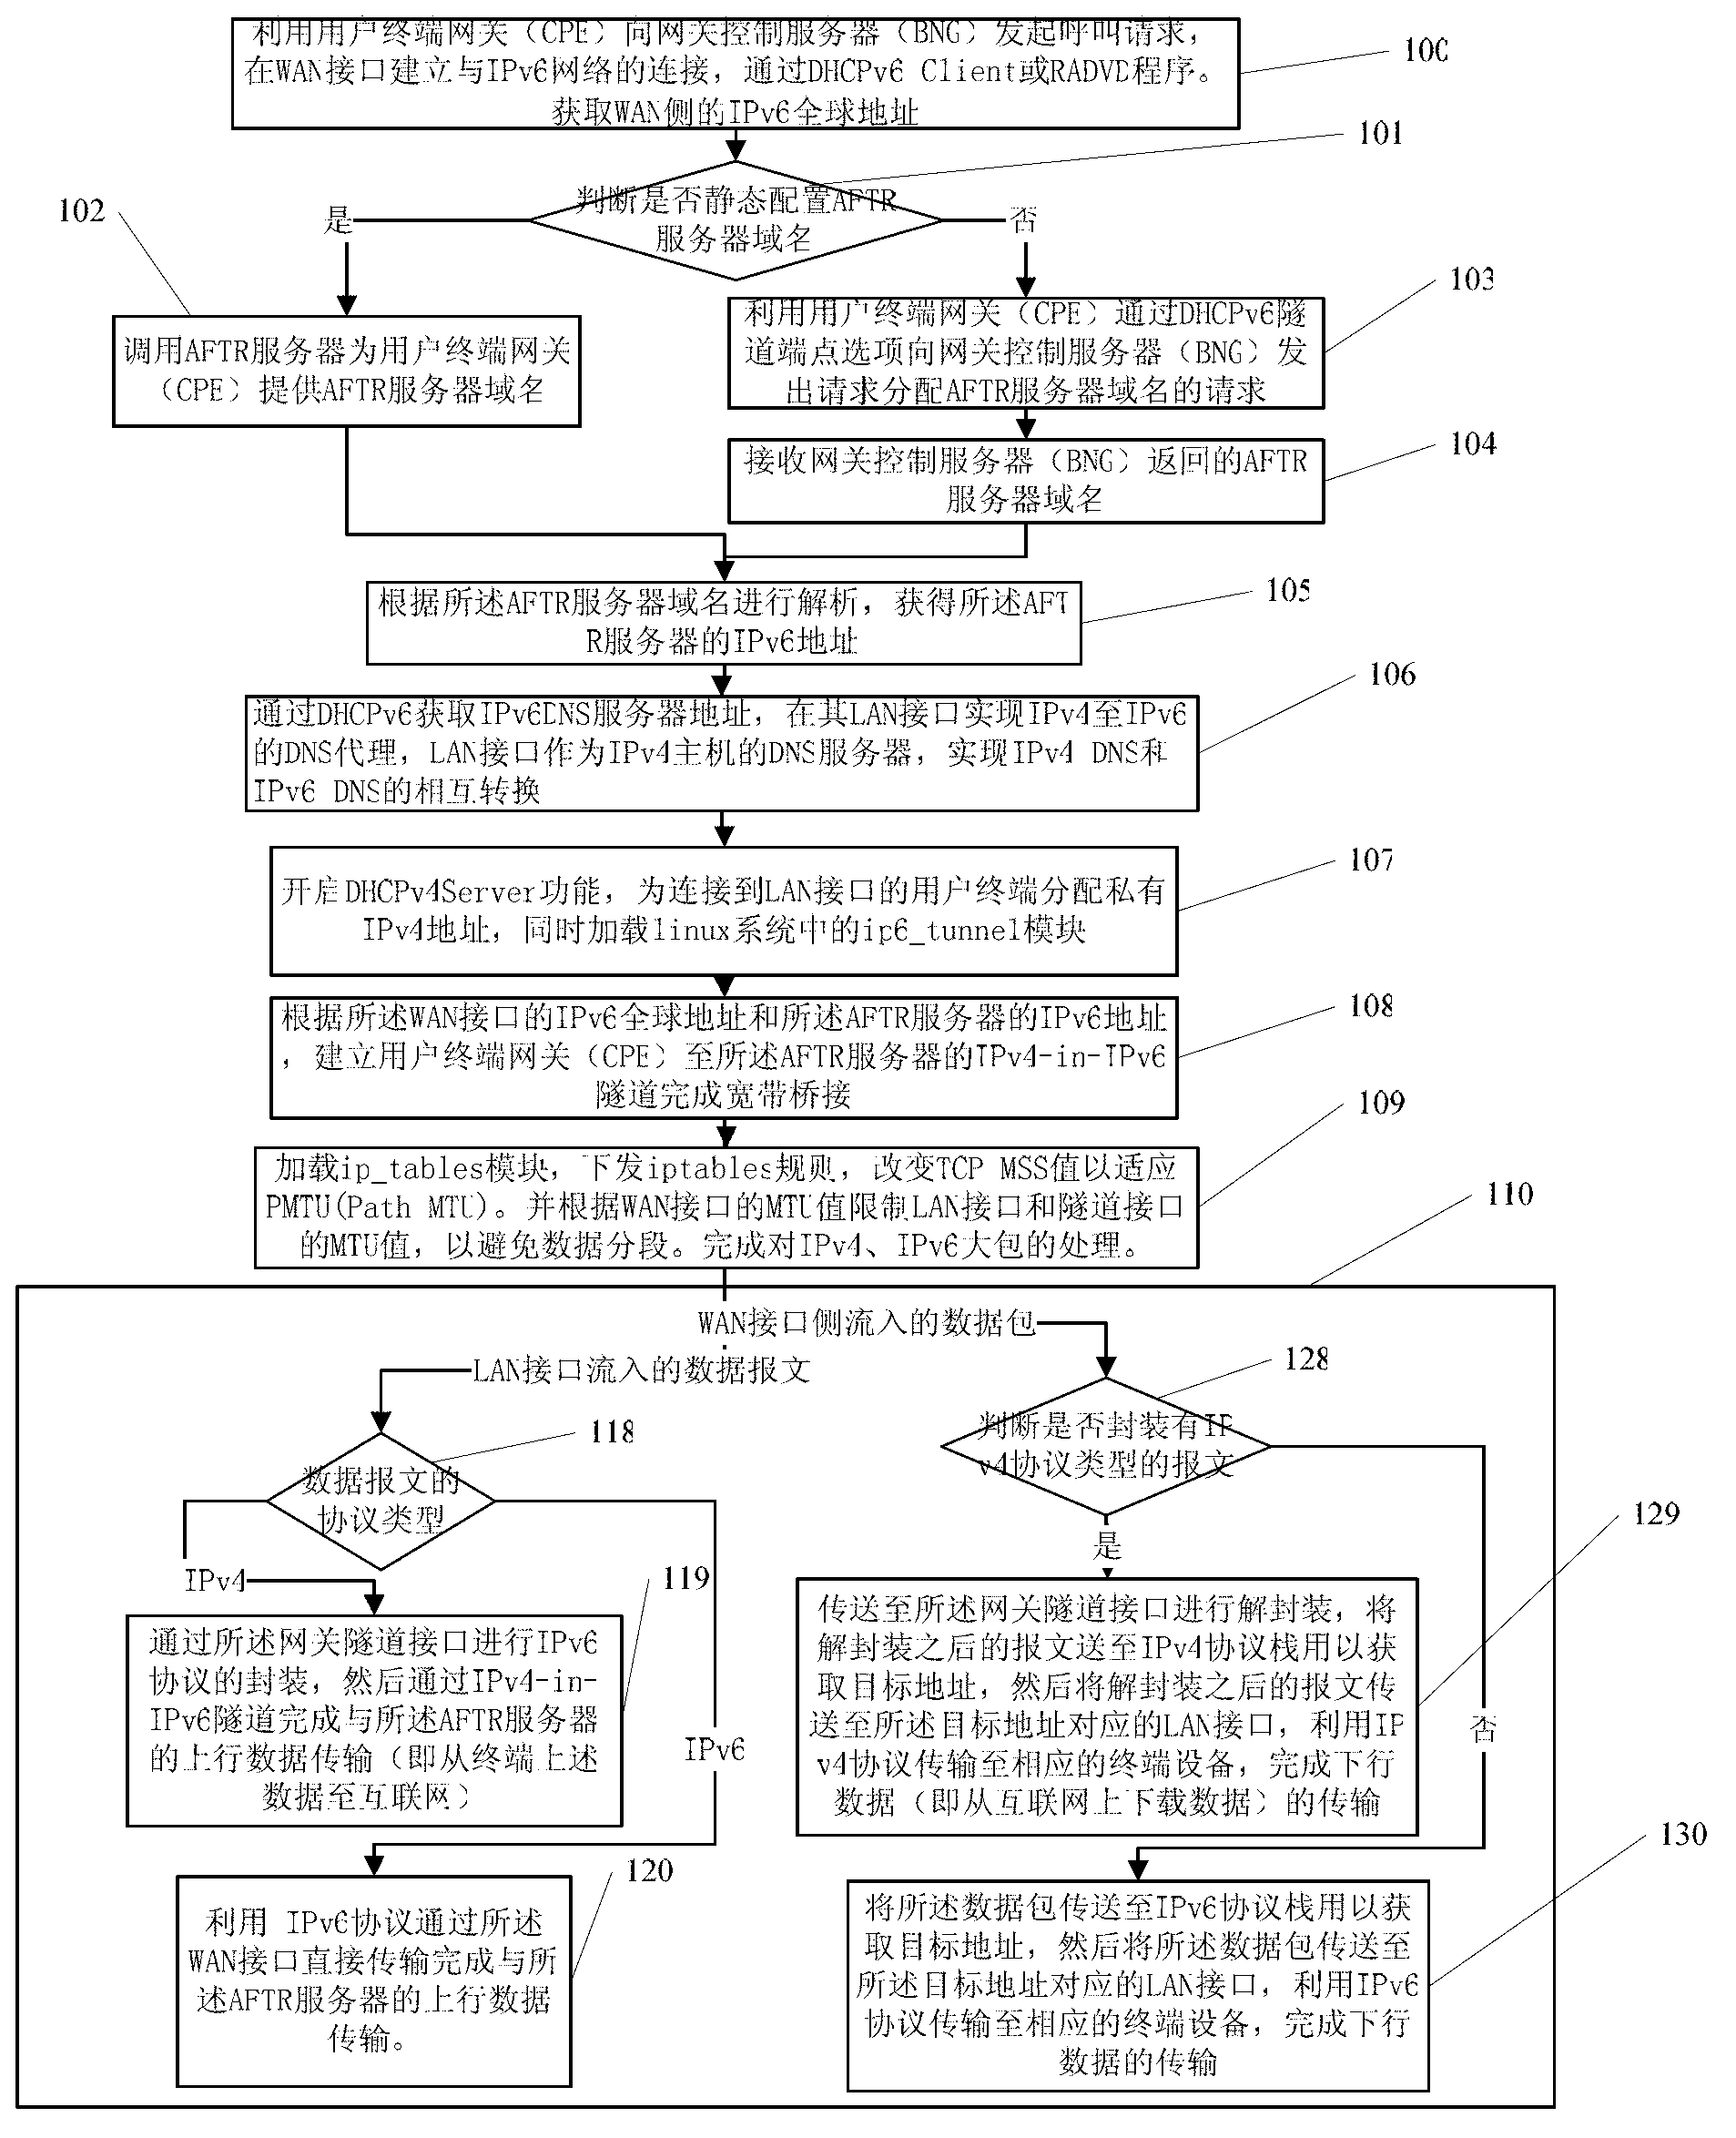 Linux-based dual-stack lite (DS-lite) implementation method and customer premise equipment (CPE) access equipment thereof